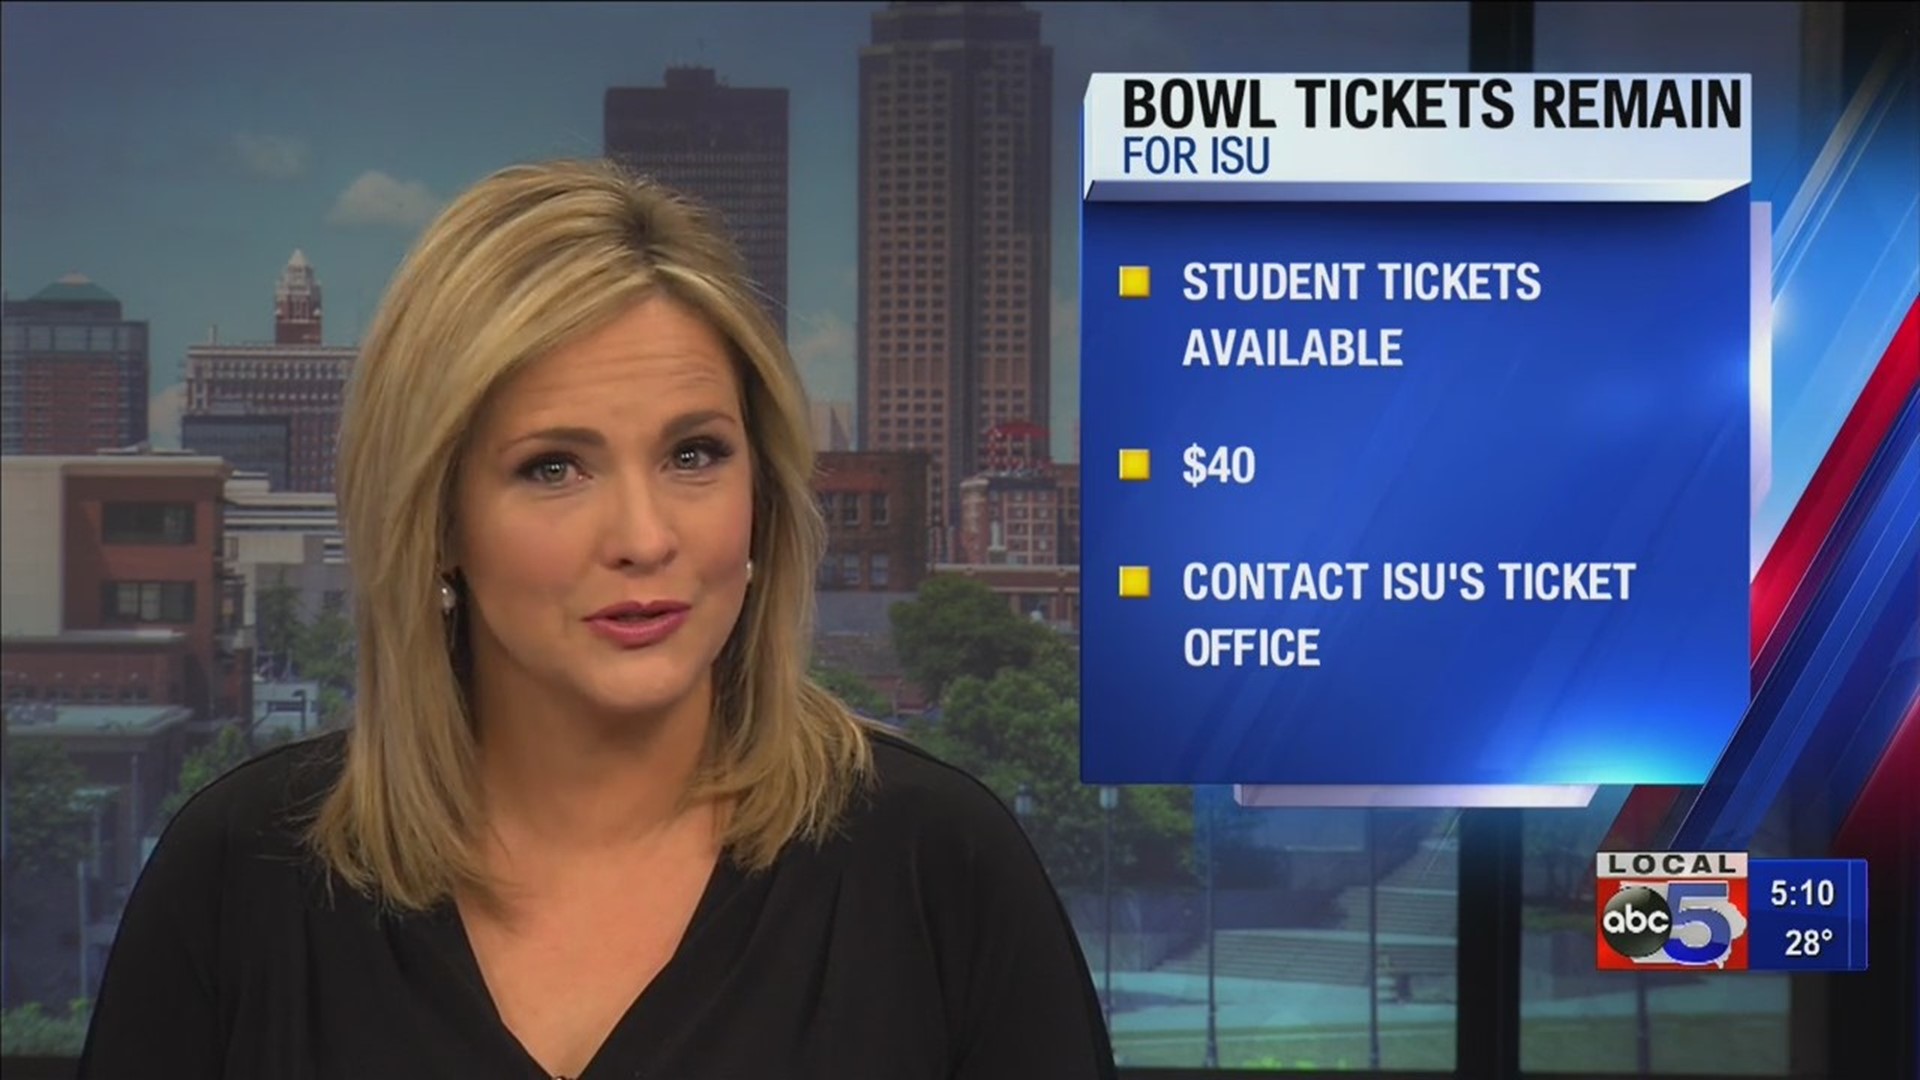 Remaining tickets for ISU bowl allotment